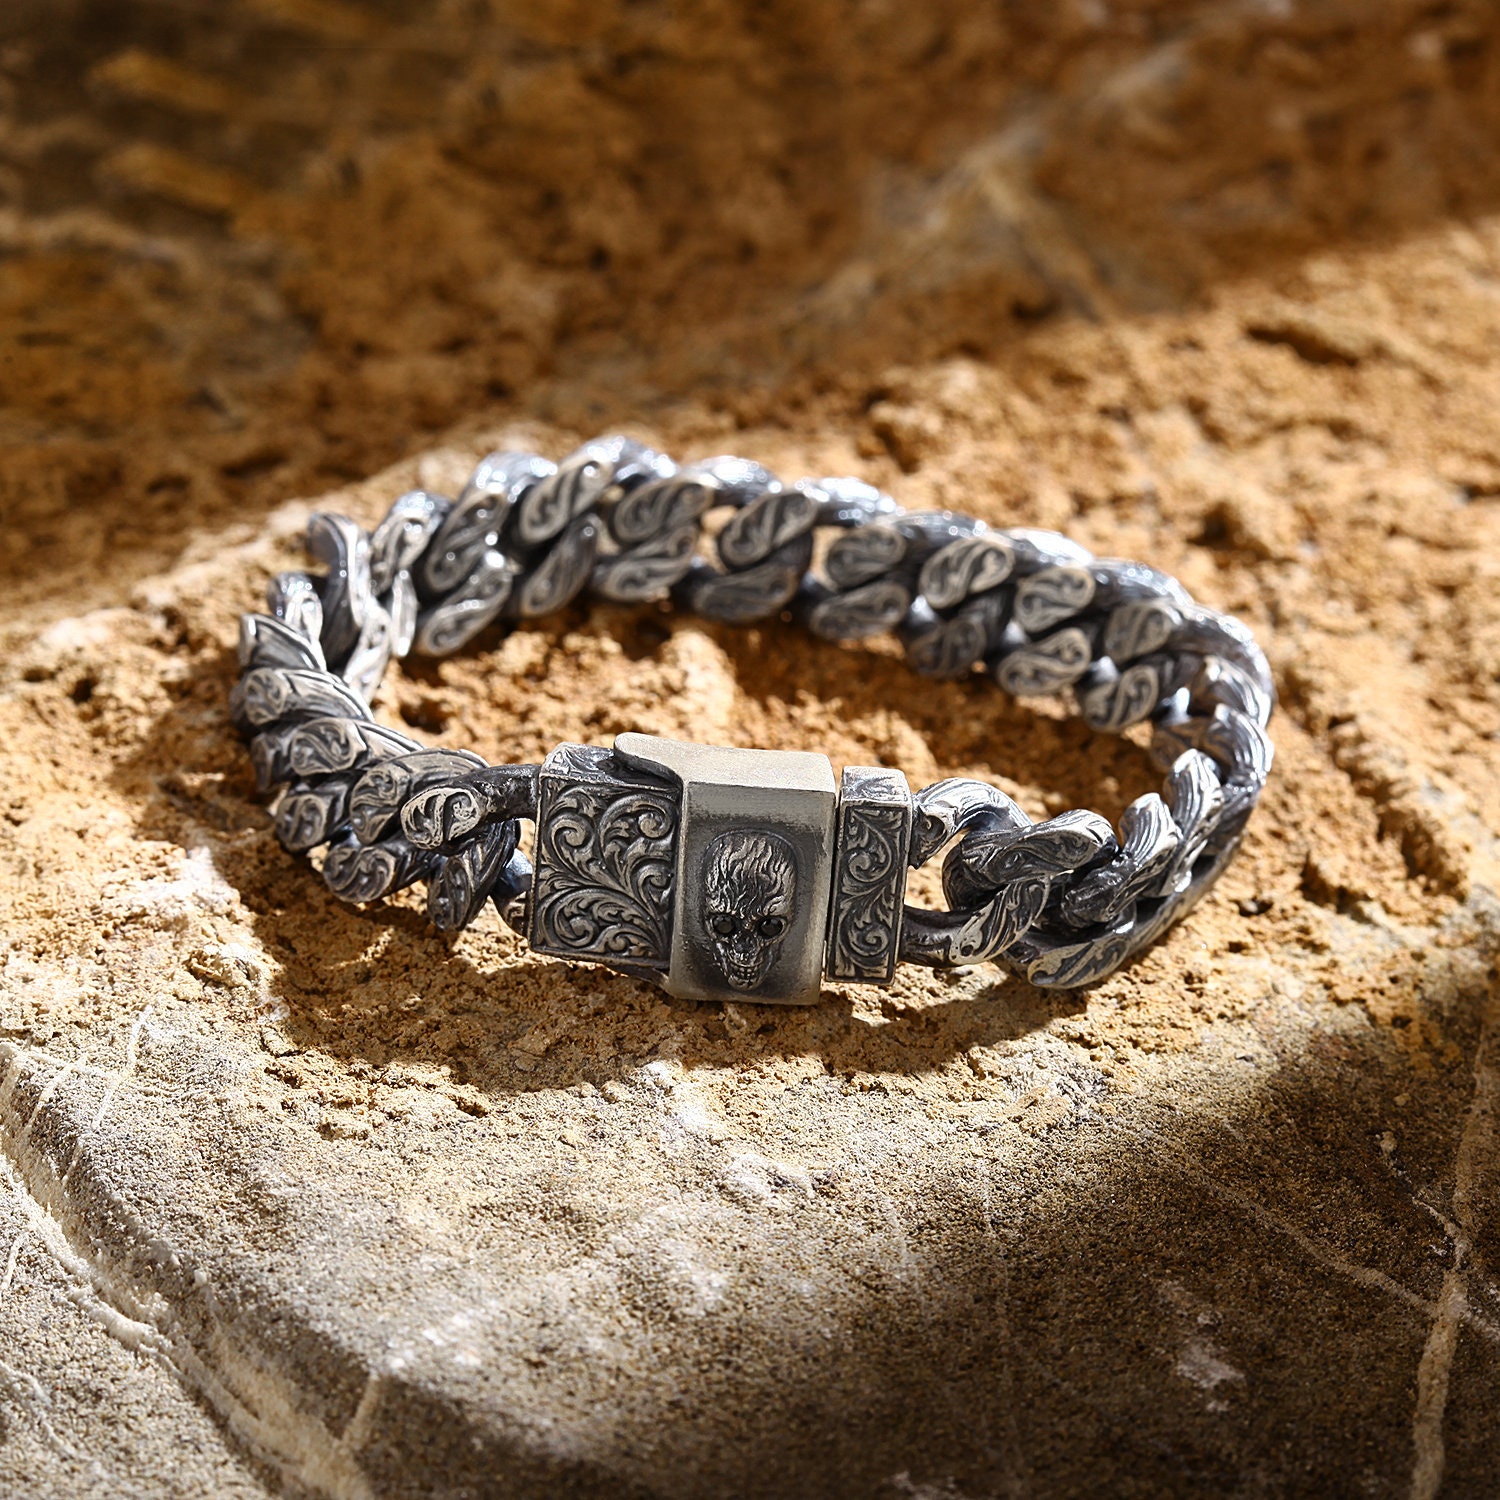 Romantic Gifts for Her - Milanese Chain Bracelet with Names